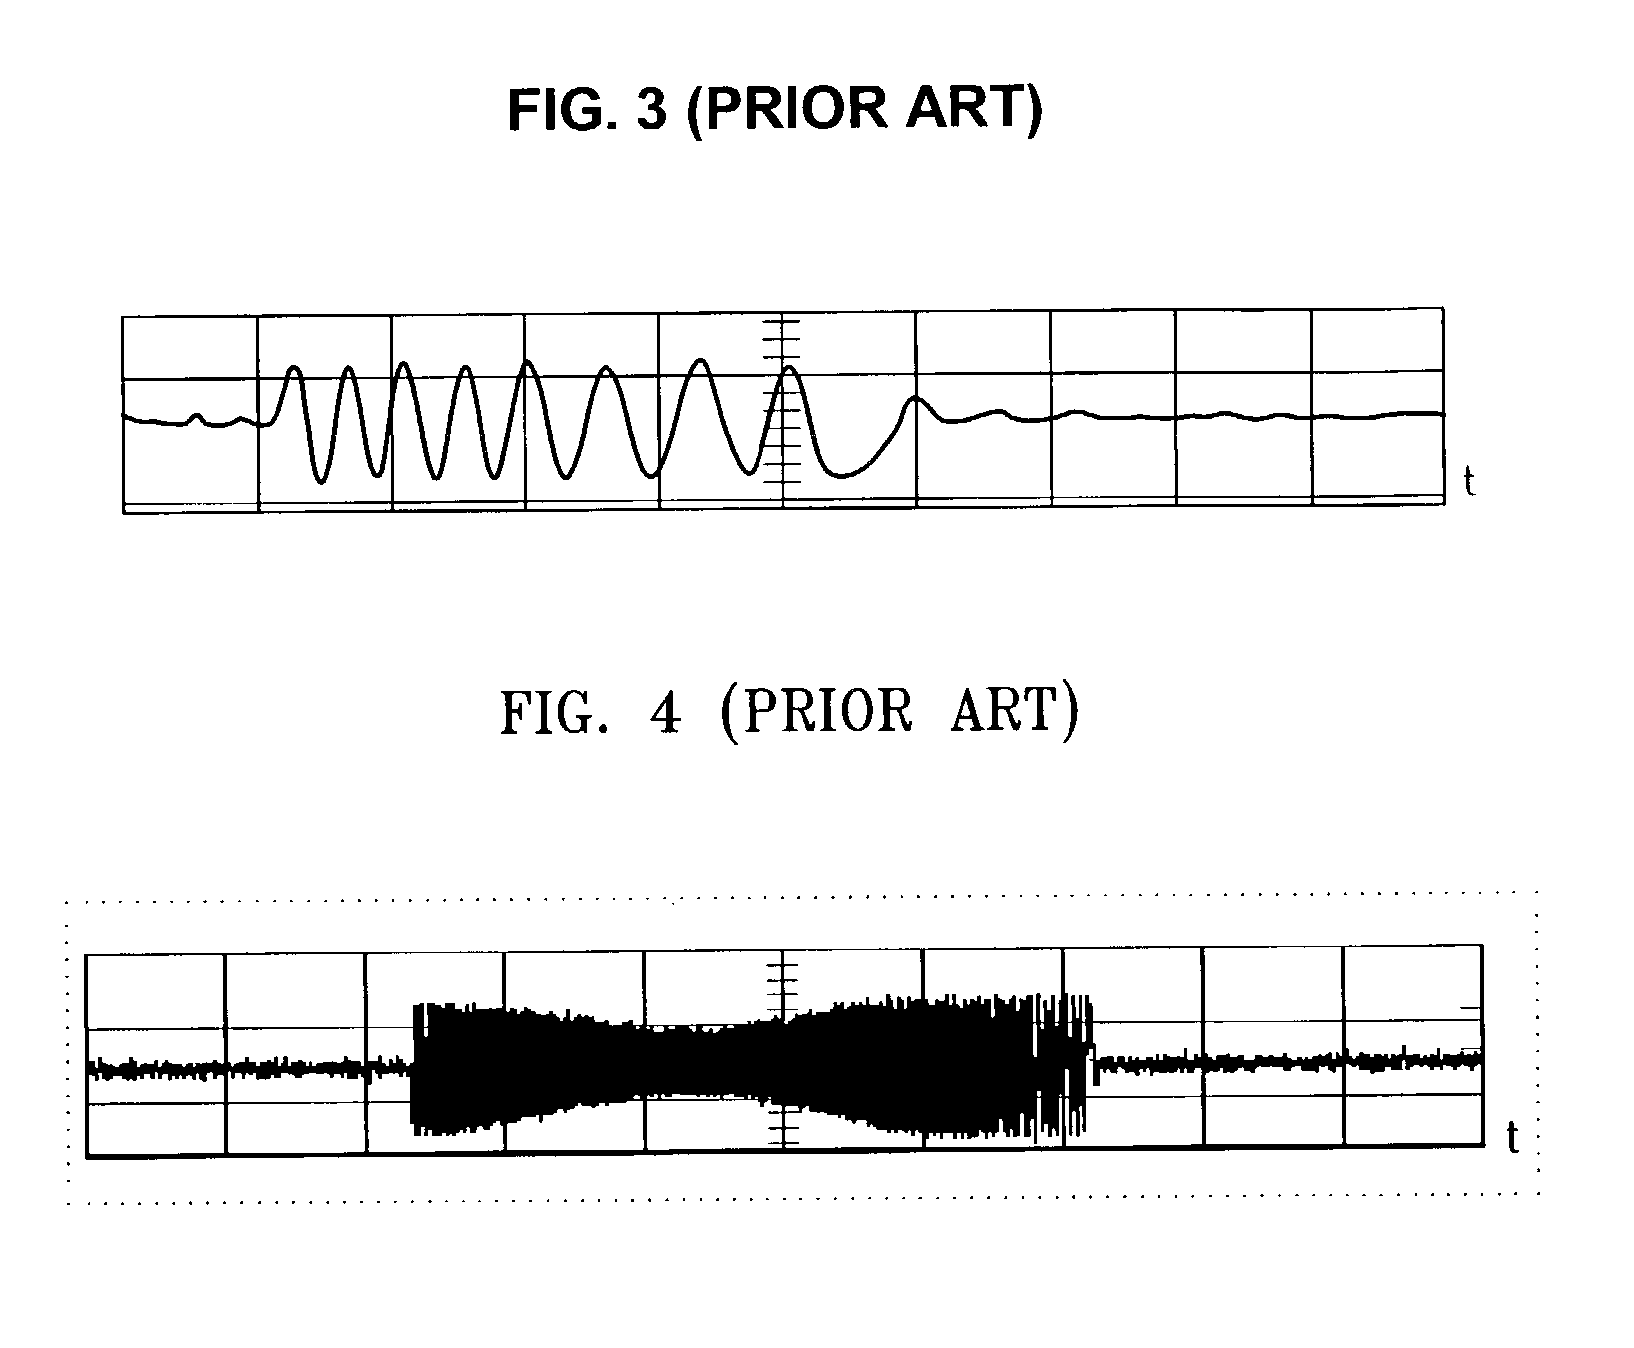 Method and apparatus for canceling glitch noise from track cross signal